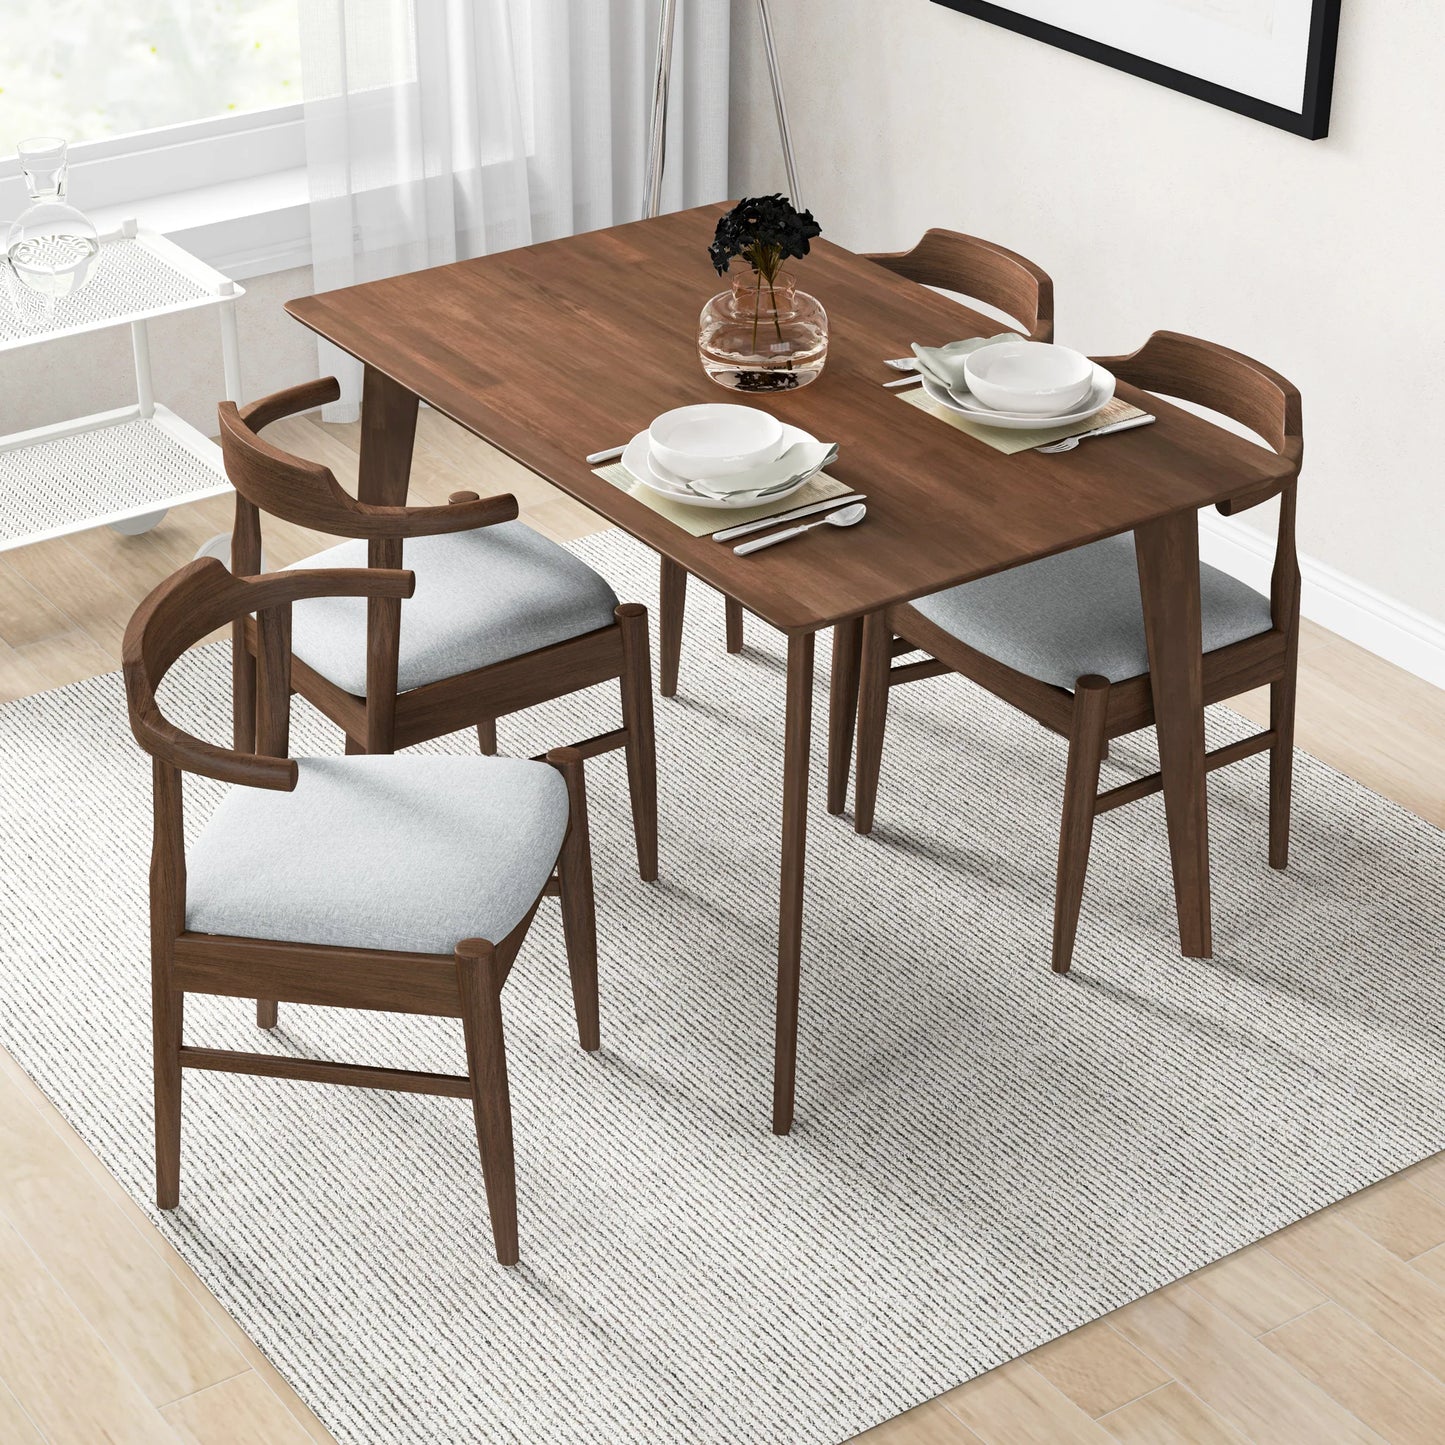 Dining Set, Abbott Small Walnut Table with 4 Zola Gray Chairs